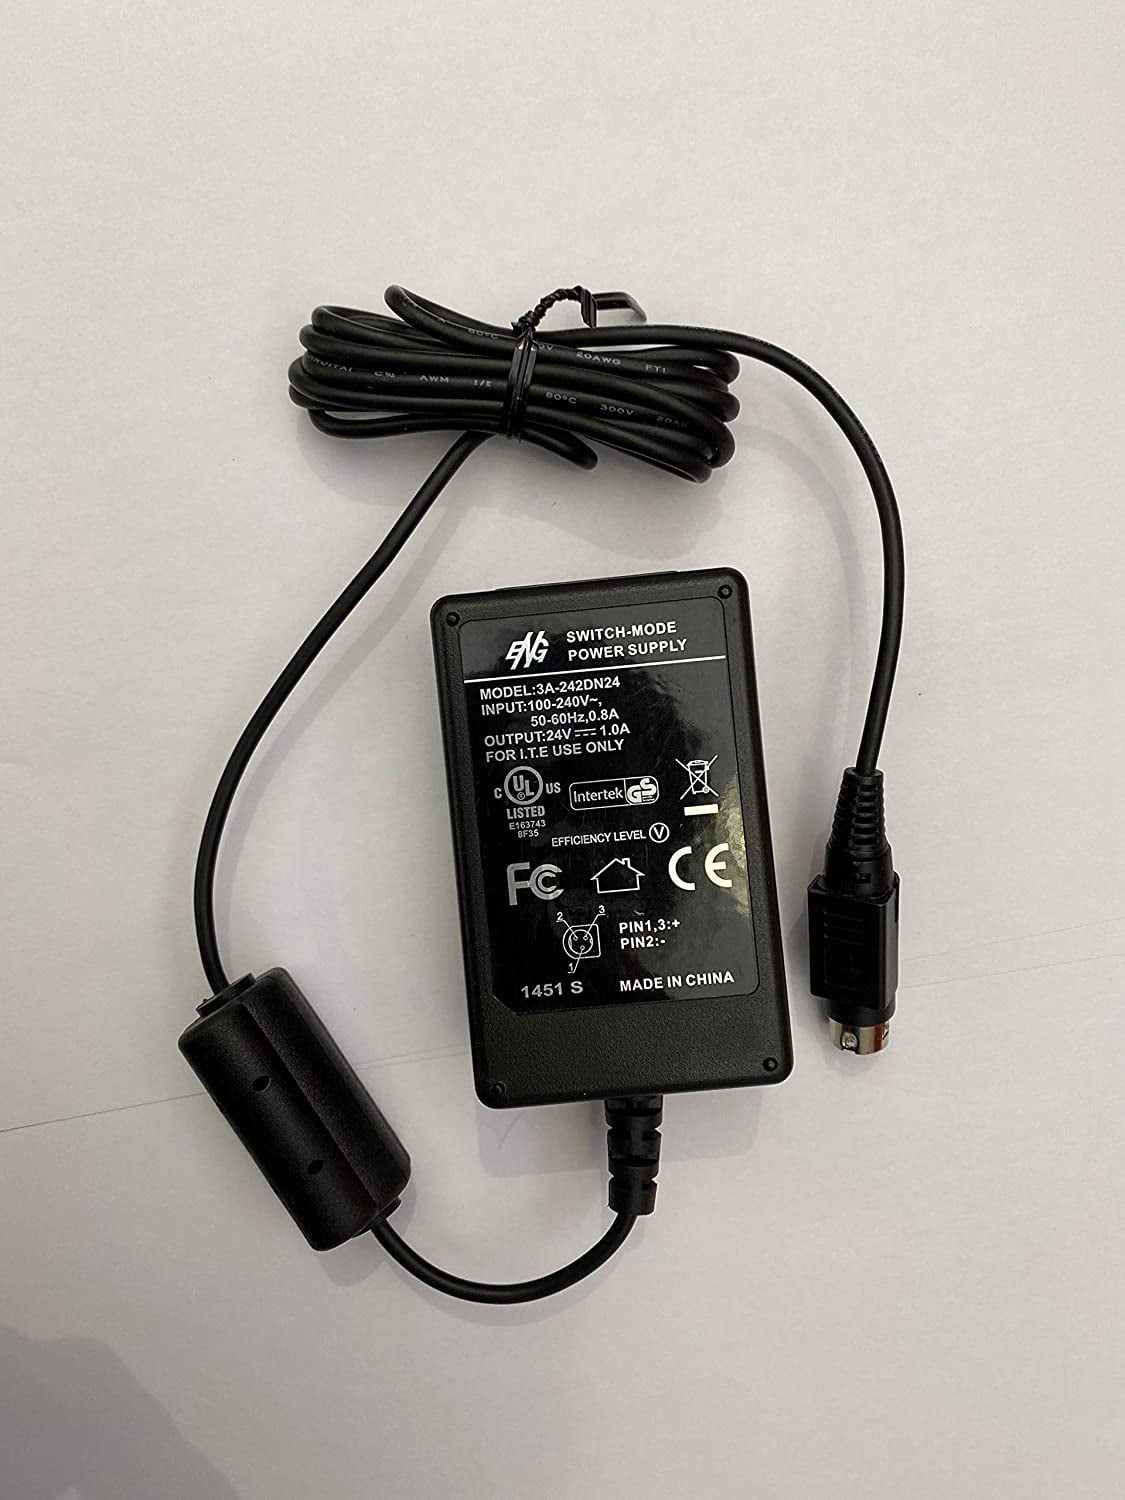 UPBRIGHT 24V 1A AC/DC Adapter Compatible with ENG Model 3A-242DN24  3A242DN24 24VDC 1000mA 24.0V 1.0A 3 Pin Connector Switch Mode Power Supply  Cord Cable PS Battery Charger Mains PSU 